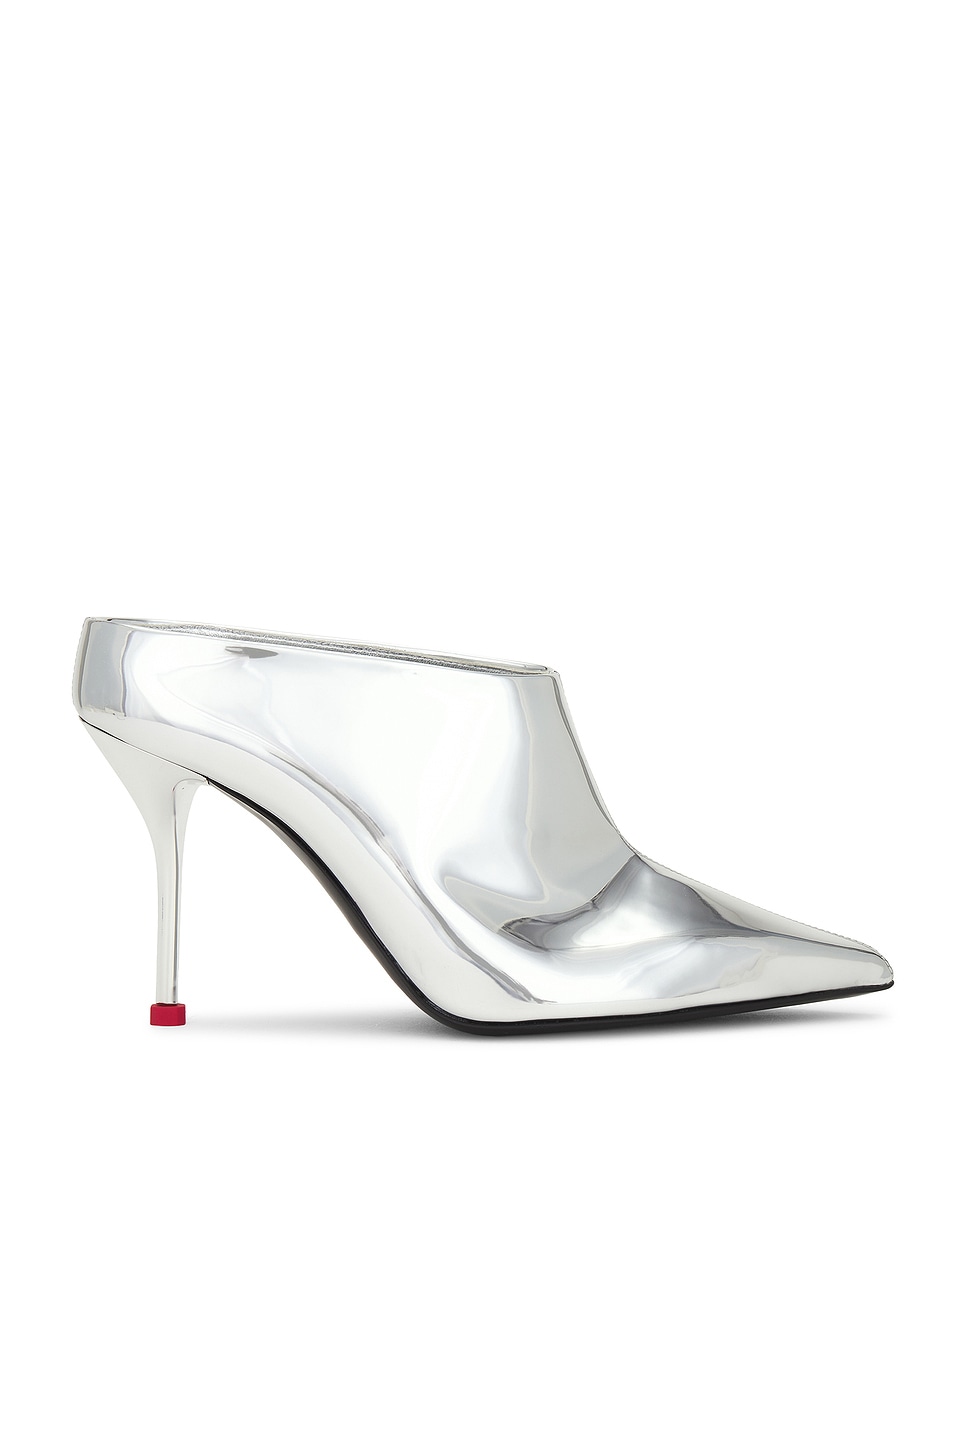 Image 1 of Alexander McQueen Pointed Mule in Silver & Lust Red